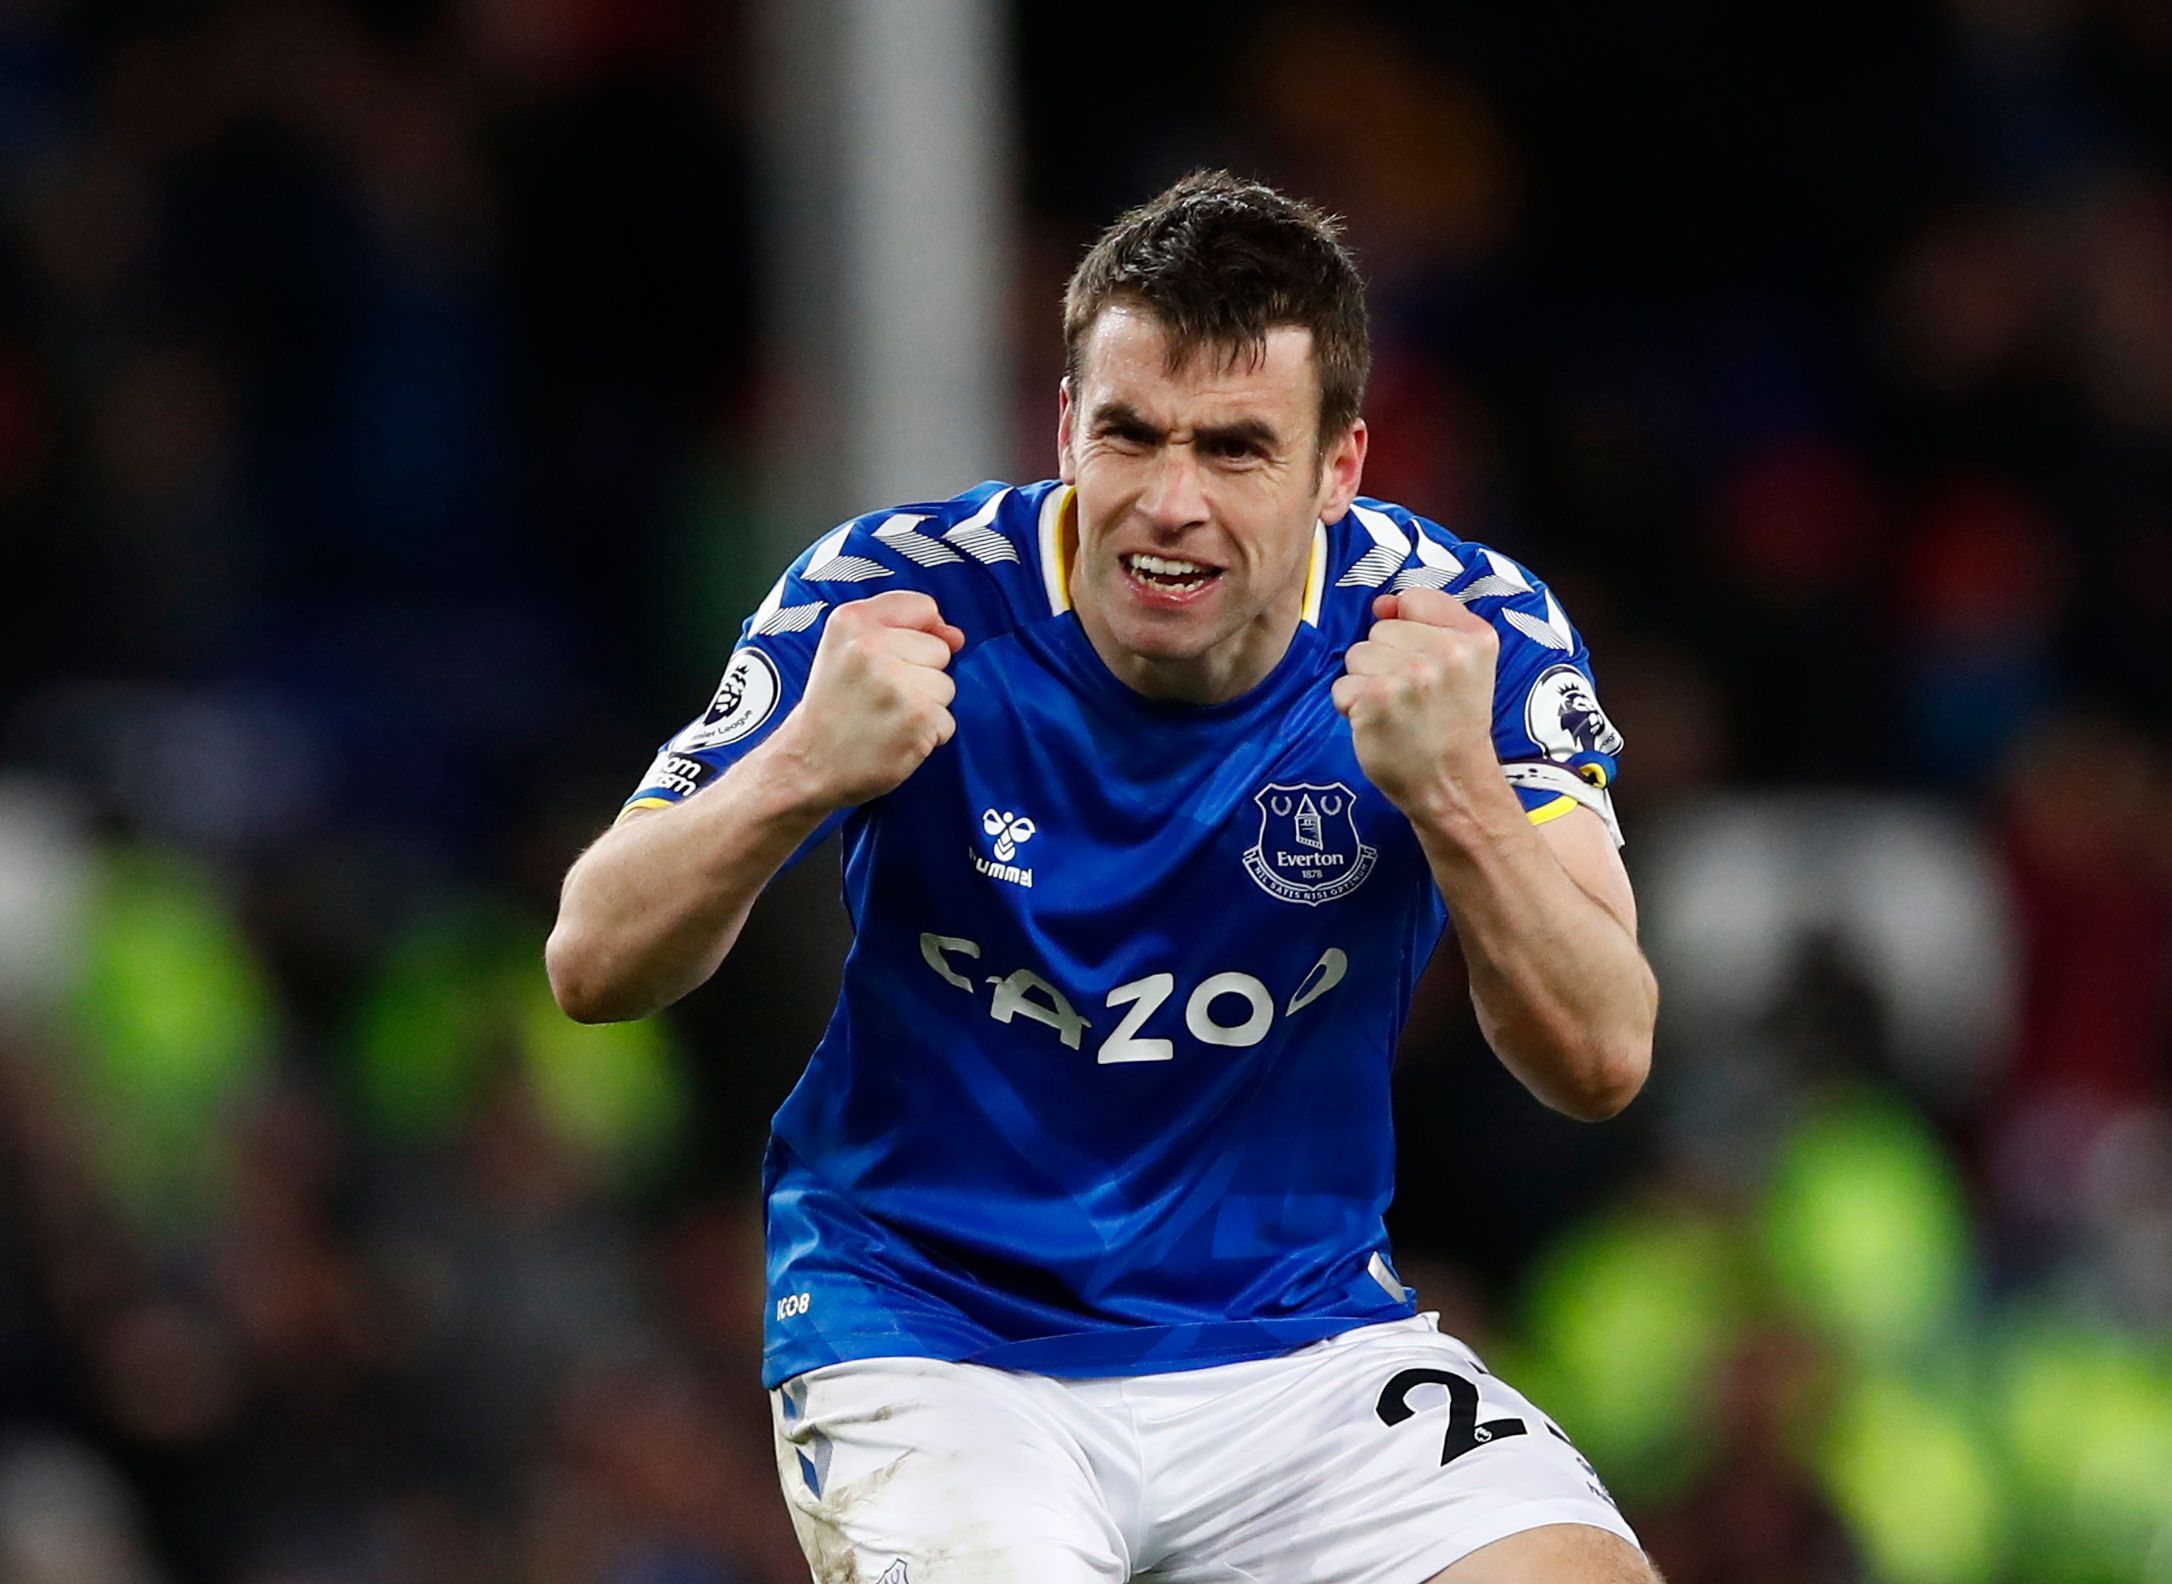 Soccer Football - Premier League - Everton v Arsenal - Goodison Park, Liverpool, Britain - December 6, 2021  Everton's Seamus Coleman celebrates after the match Action Images via Reuters/Jason Cairnduff EDITORIAL USE ONLY. No use with unauthorized audio, video, data, fixture lists, club/league logos or 'live' services. Online in-match use limited to 75 images, no video emulation. No use in betting, games or single club /league/player publications.  Please contact your account representative for 